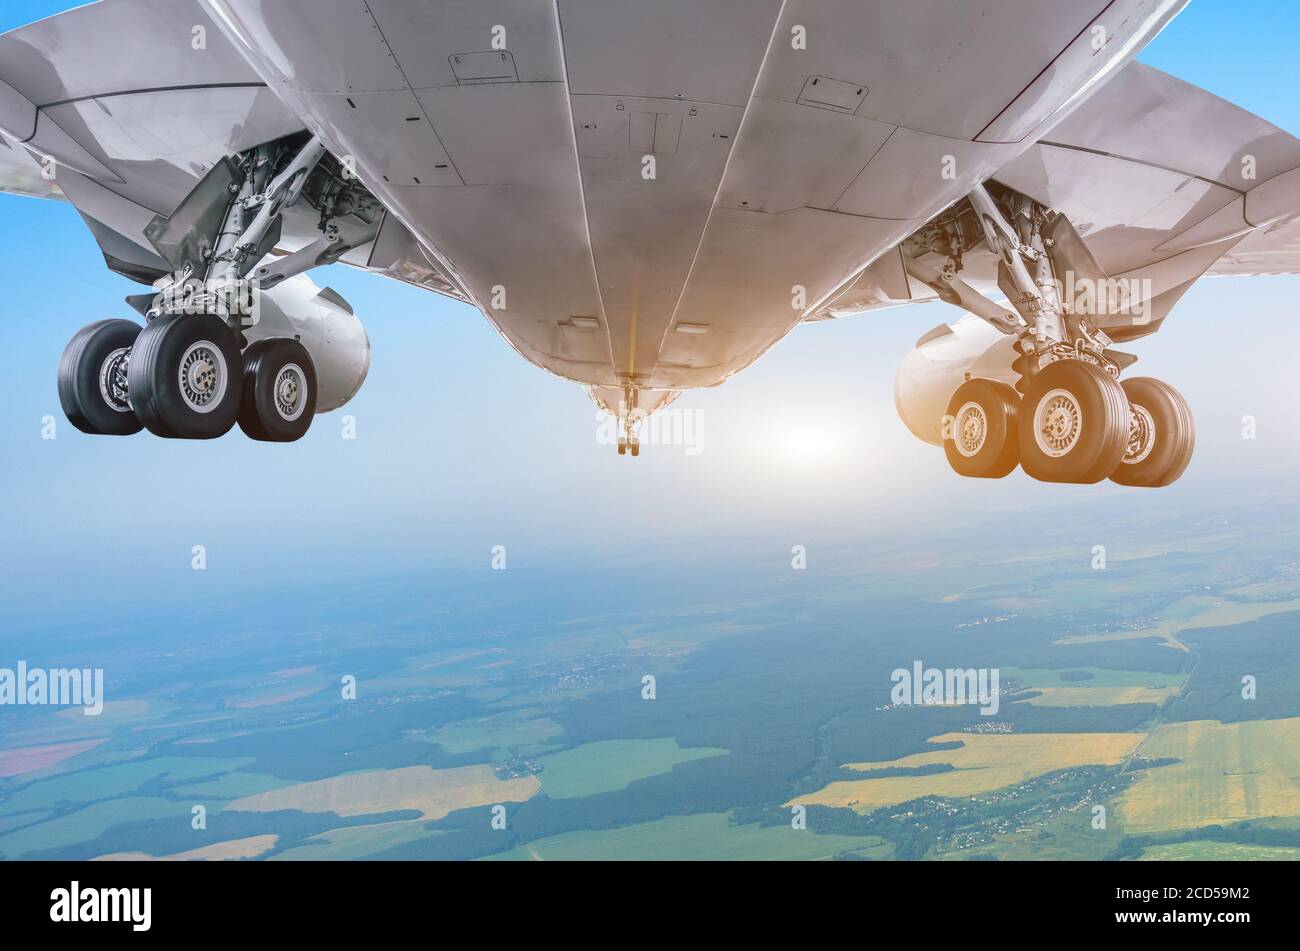 View from under the flying aircraft with the landing gear extended before approach at the airport Stock Photo